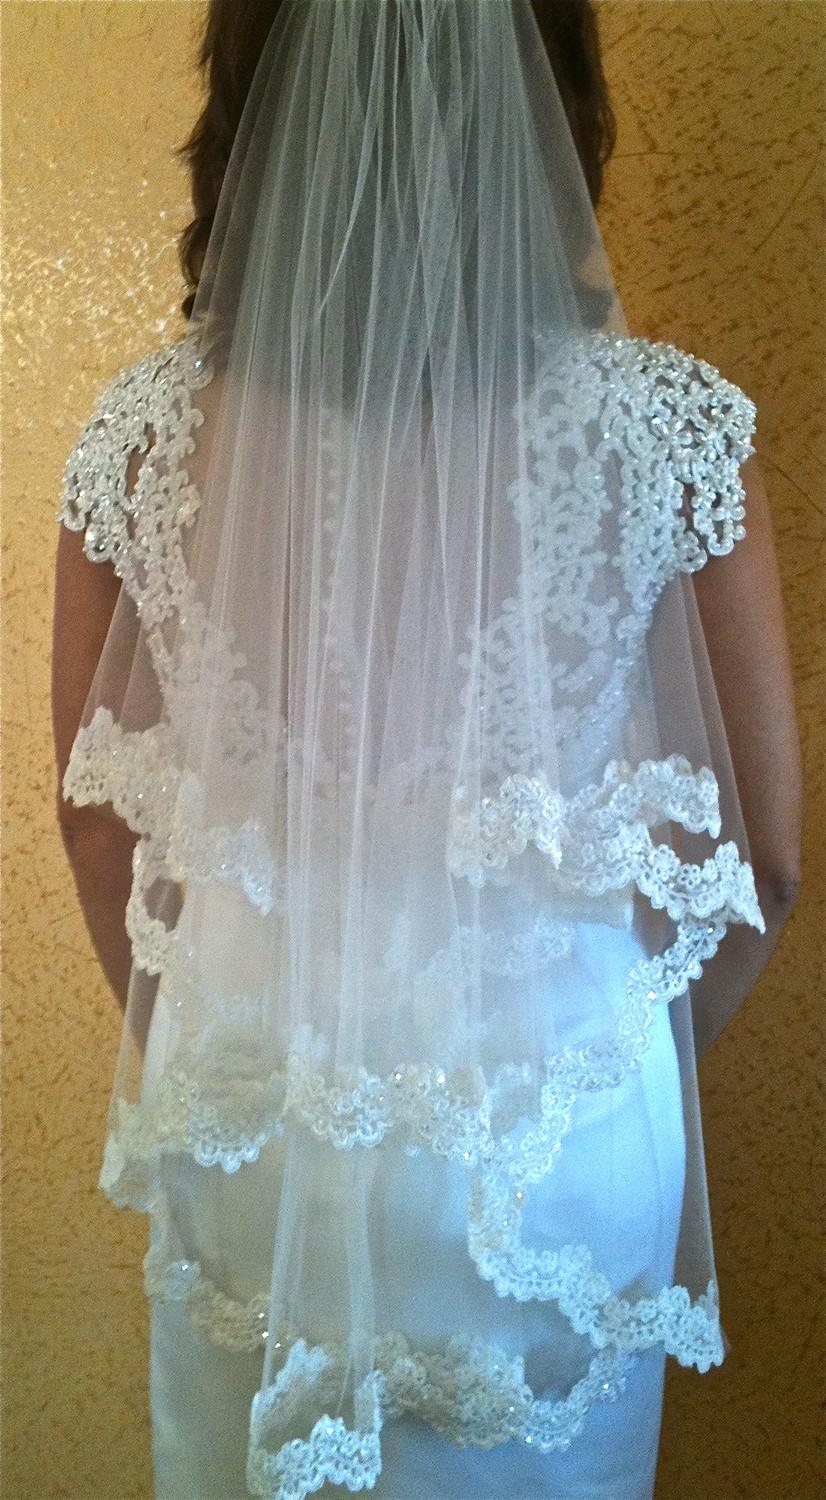 Wedding - Two tier veil Alencon lace - white or light ivory with beaded scalloped lace edge, fingertip length